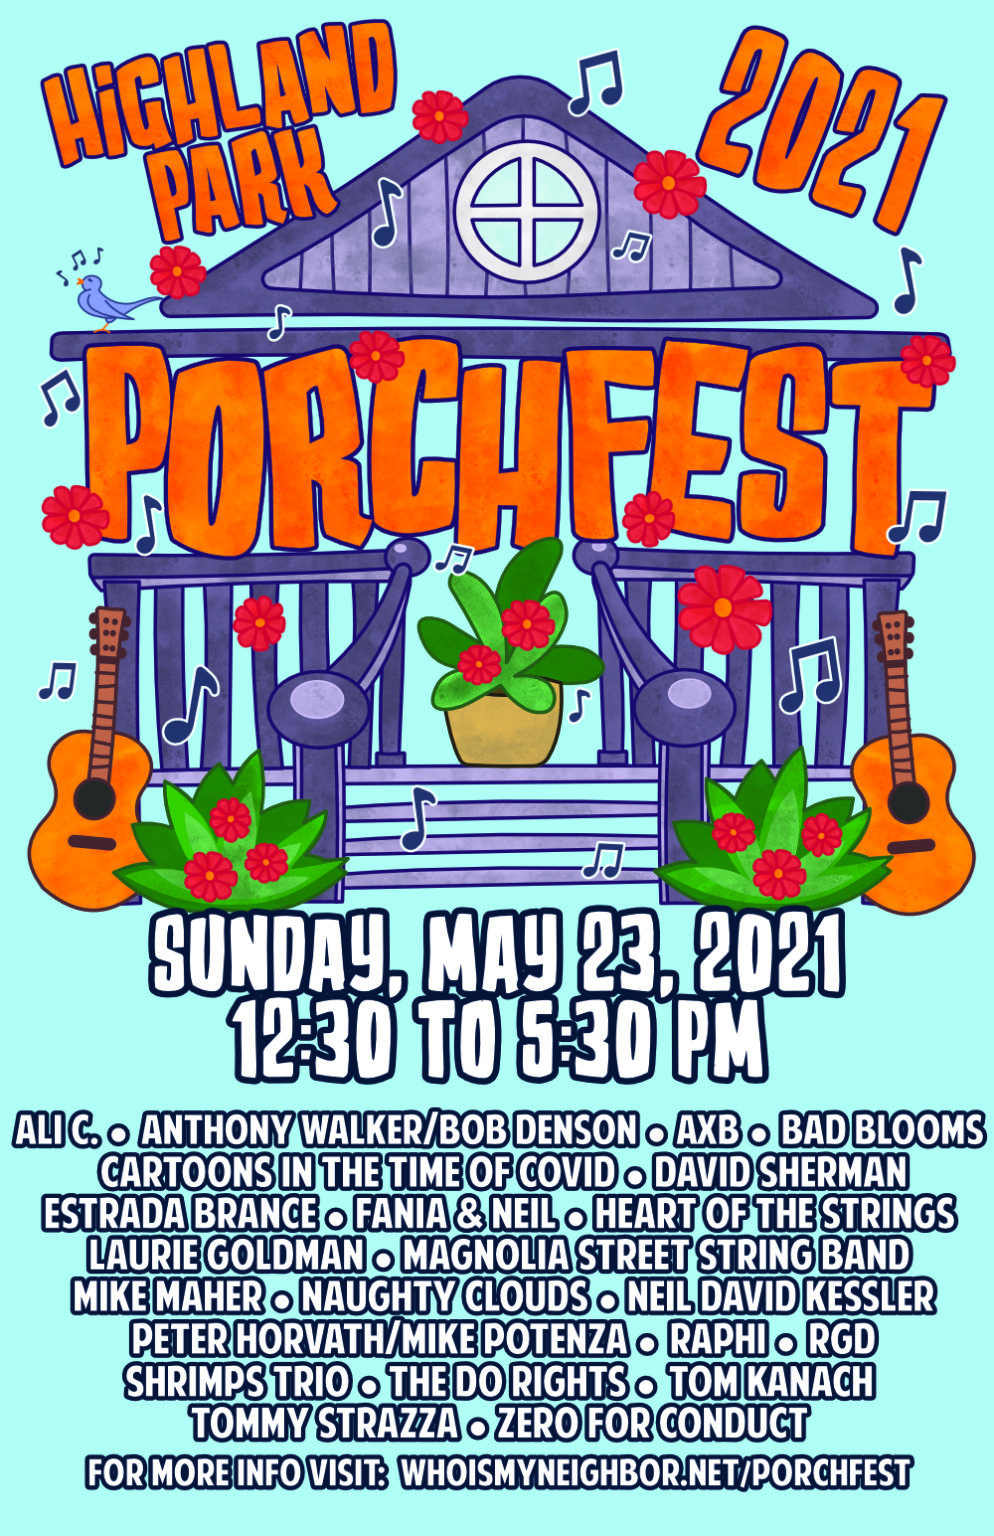 Porchfest Sunday, May 23, 1230530pm Who Is My Neighbor? Inc.